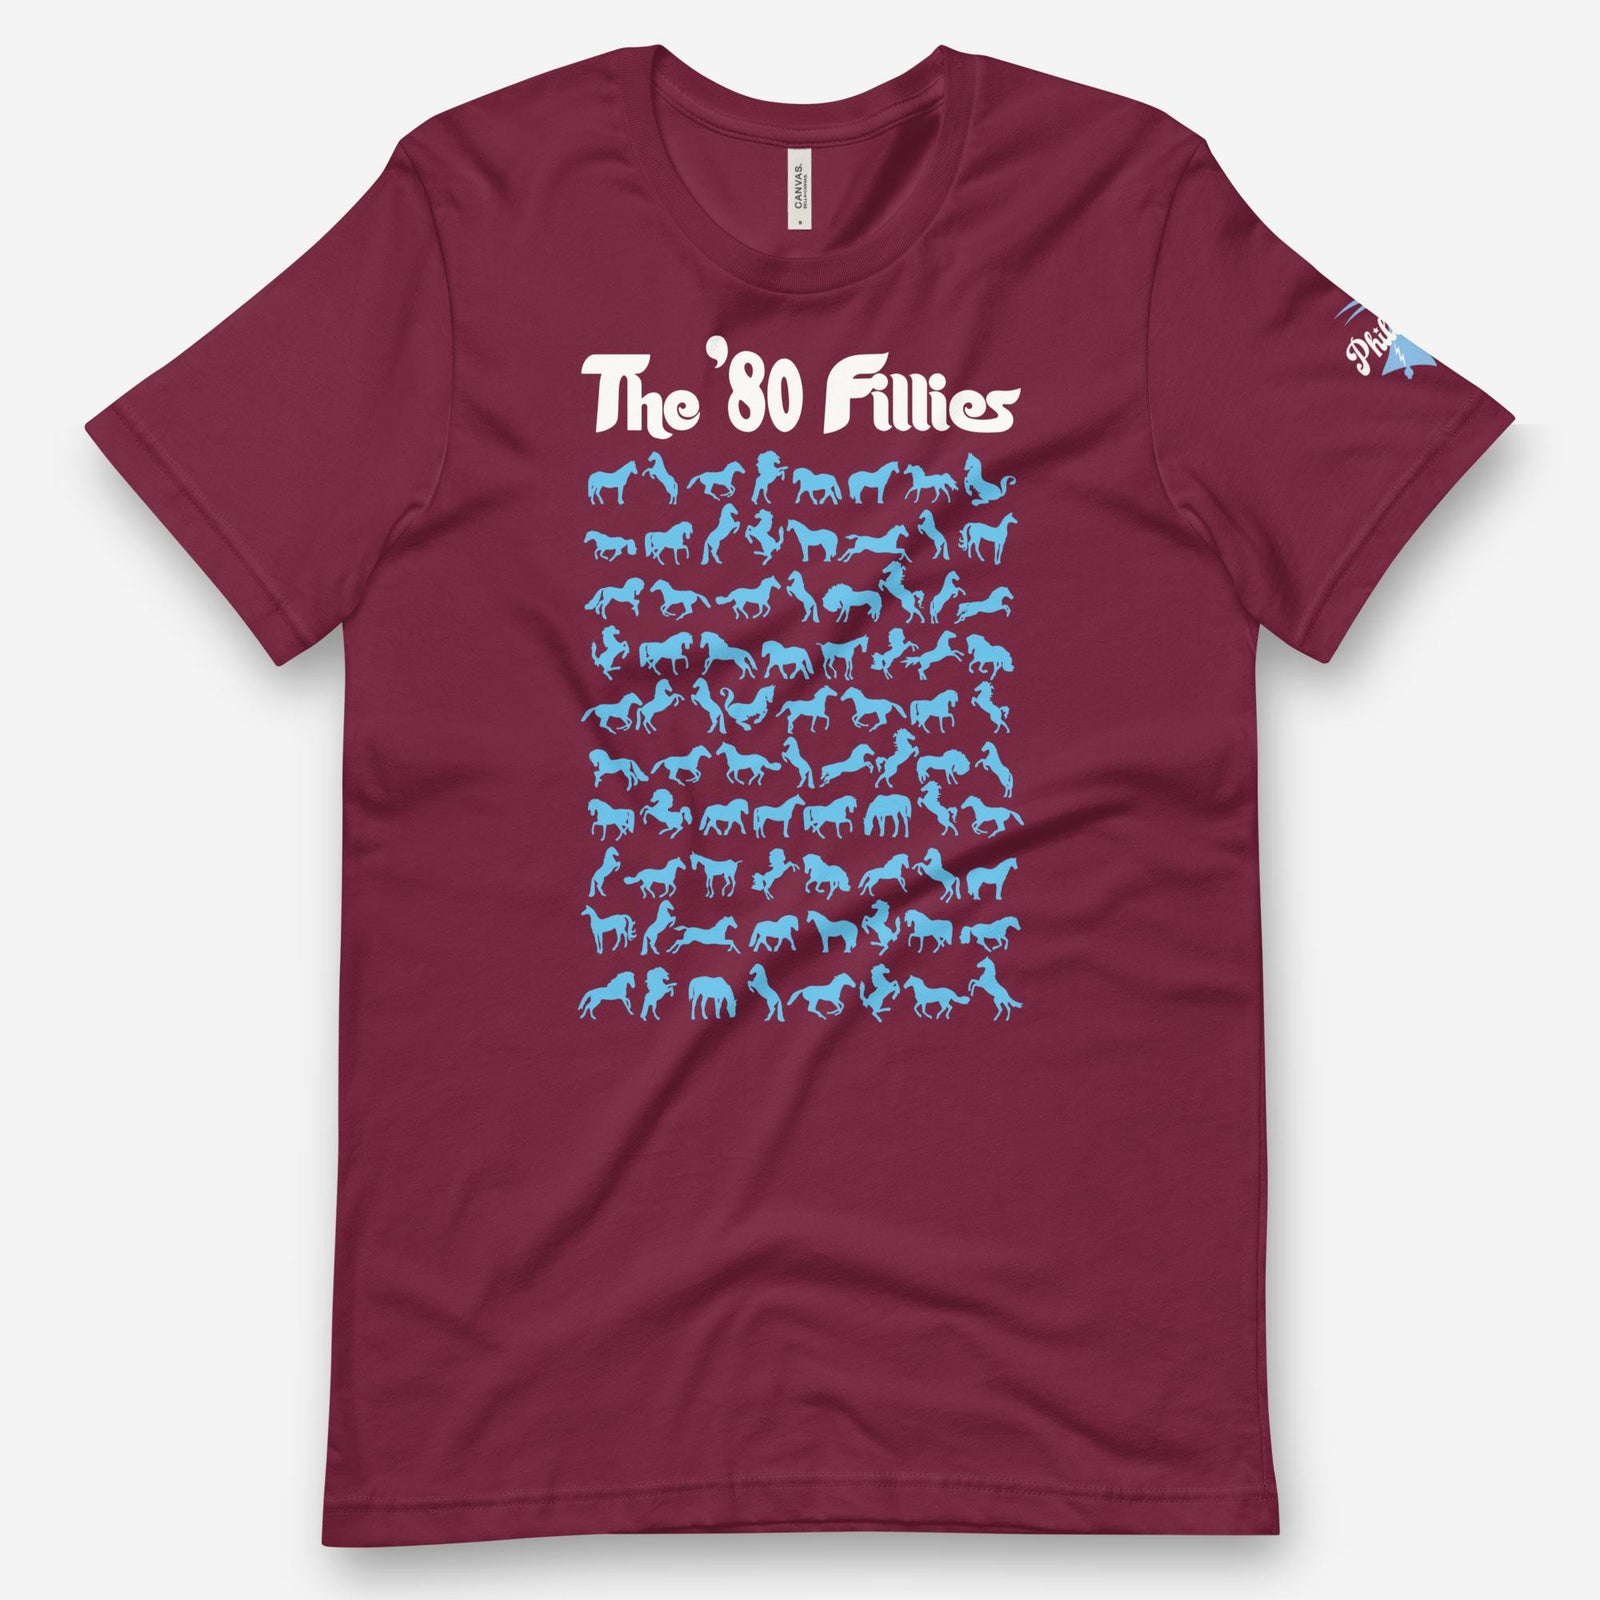 "The '80 Fillies" Tee